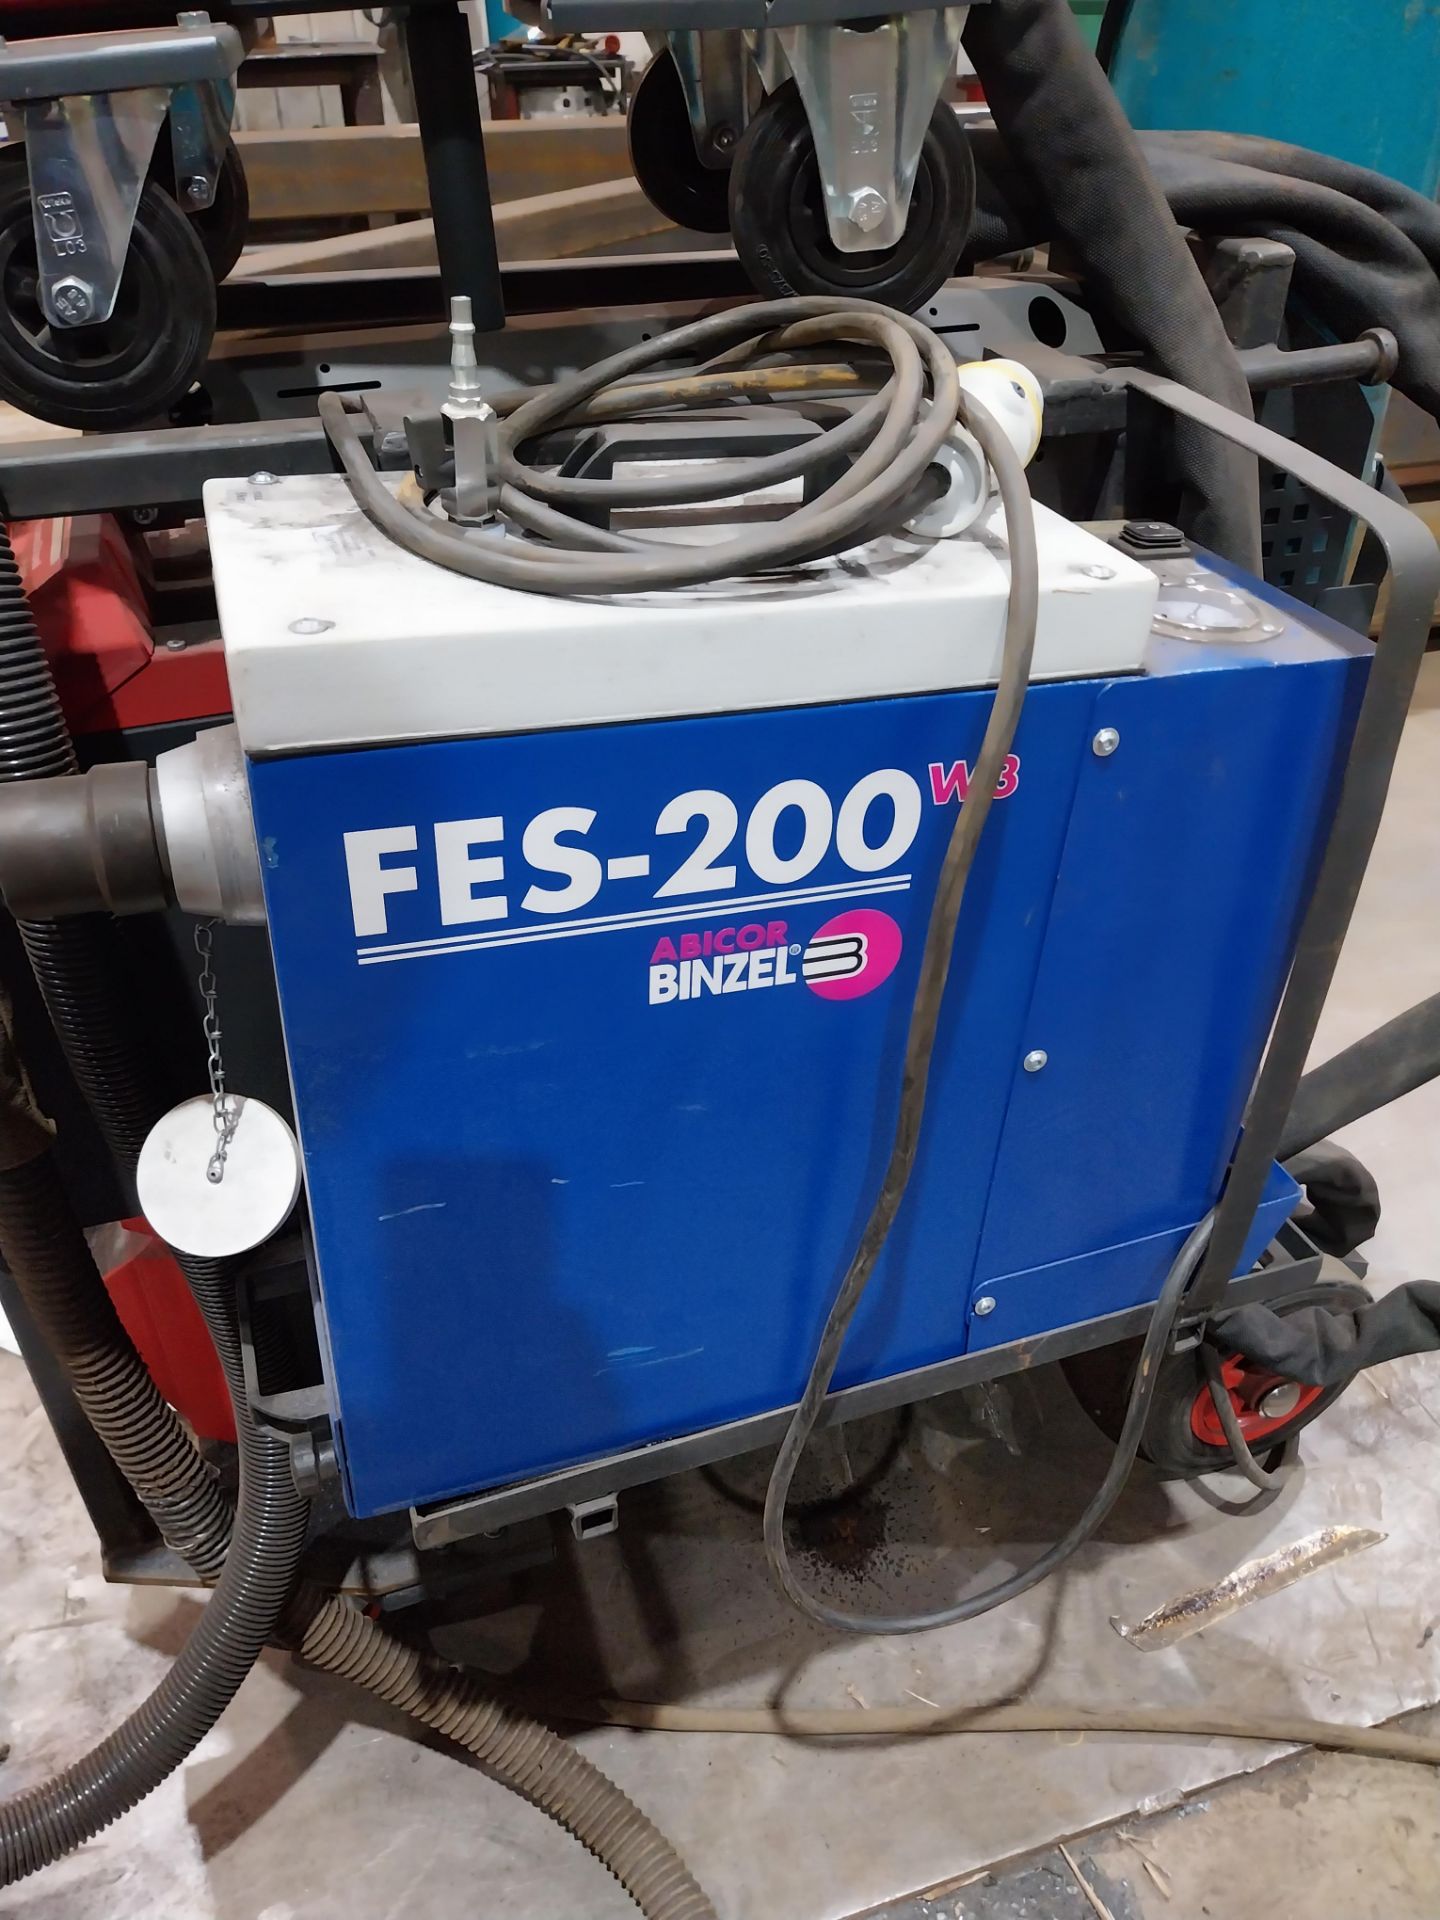 Fronius Transsteel 5000 Pulse mig welder with VR5000 wire feed, FES-200 W3 extractor, torch and - Bild 6 aus 8